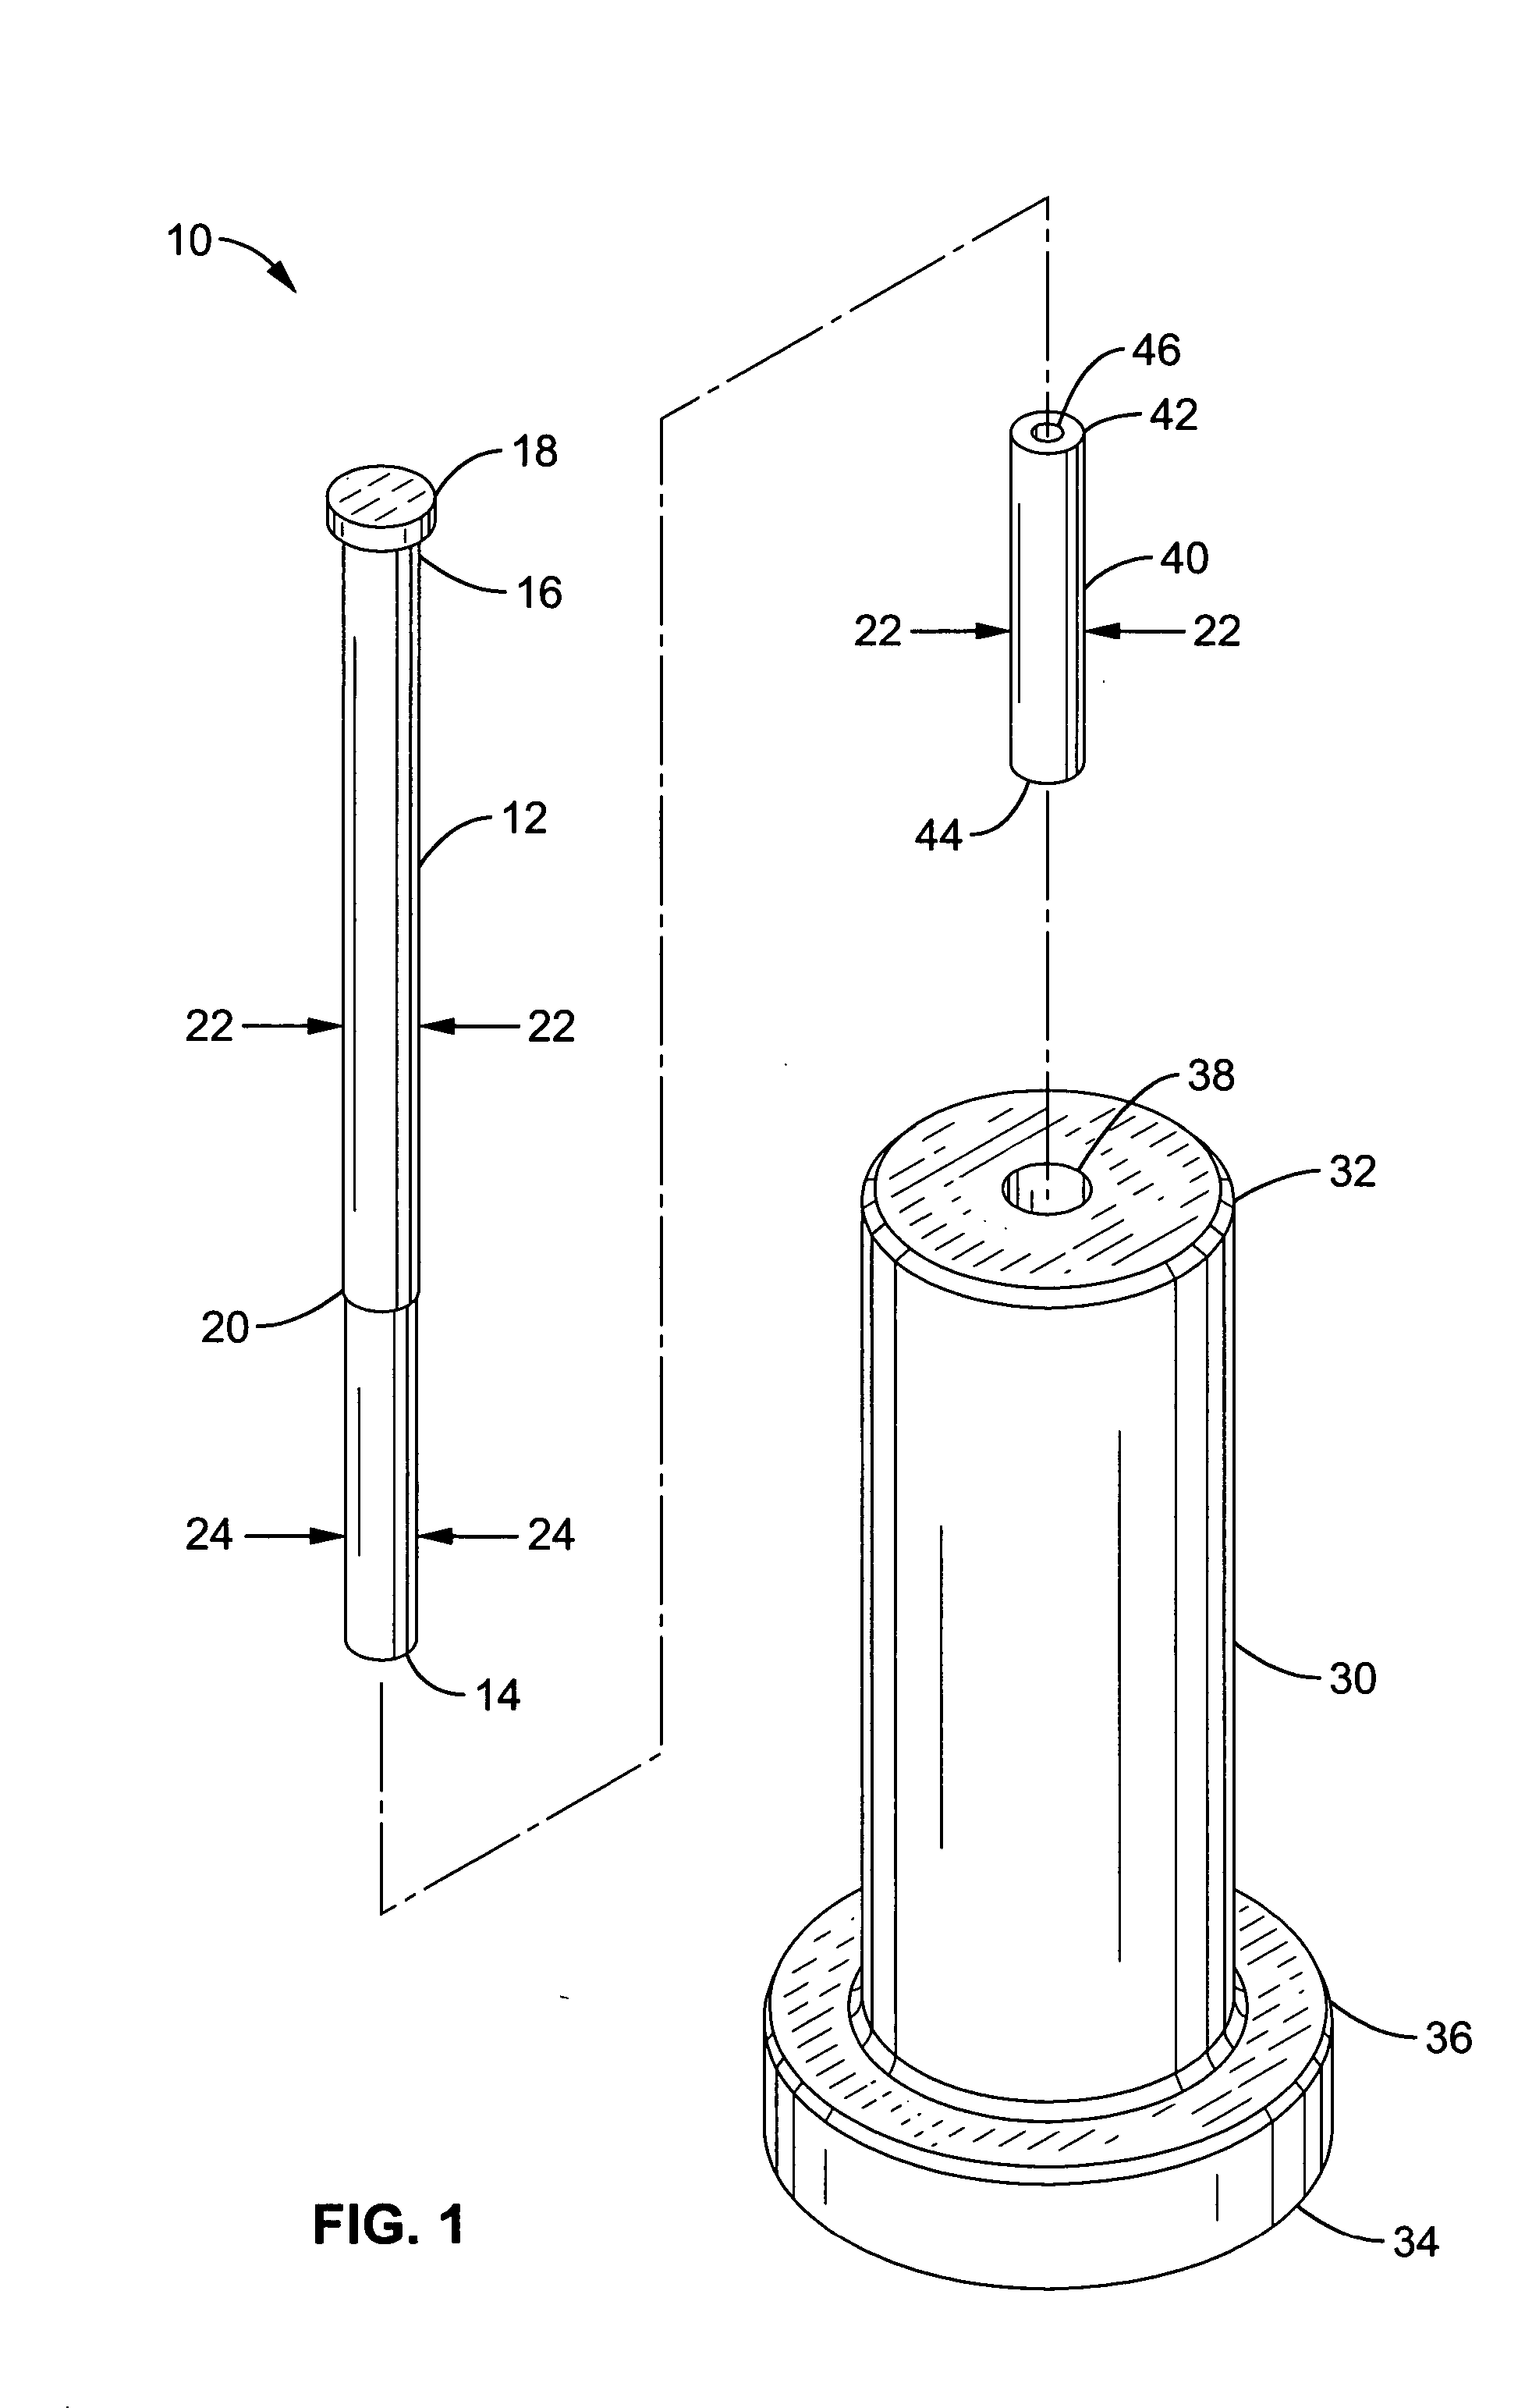 Method and apparatus for adjustably inducing biaxial strain